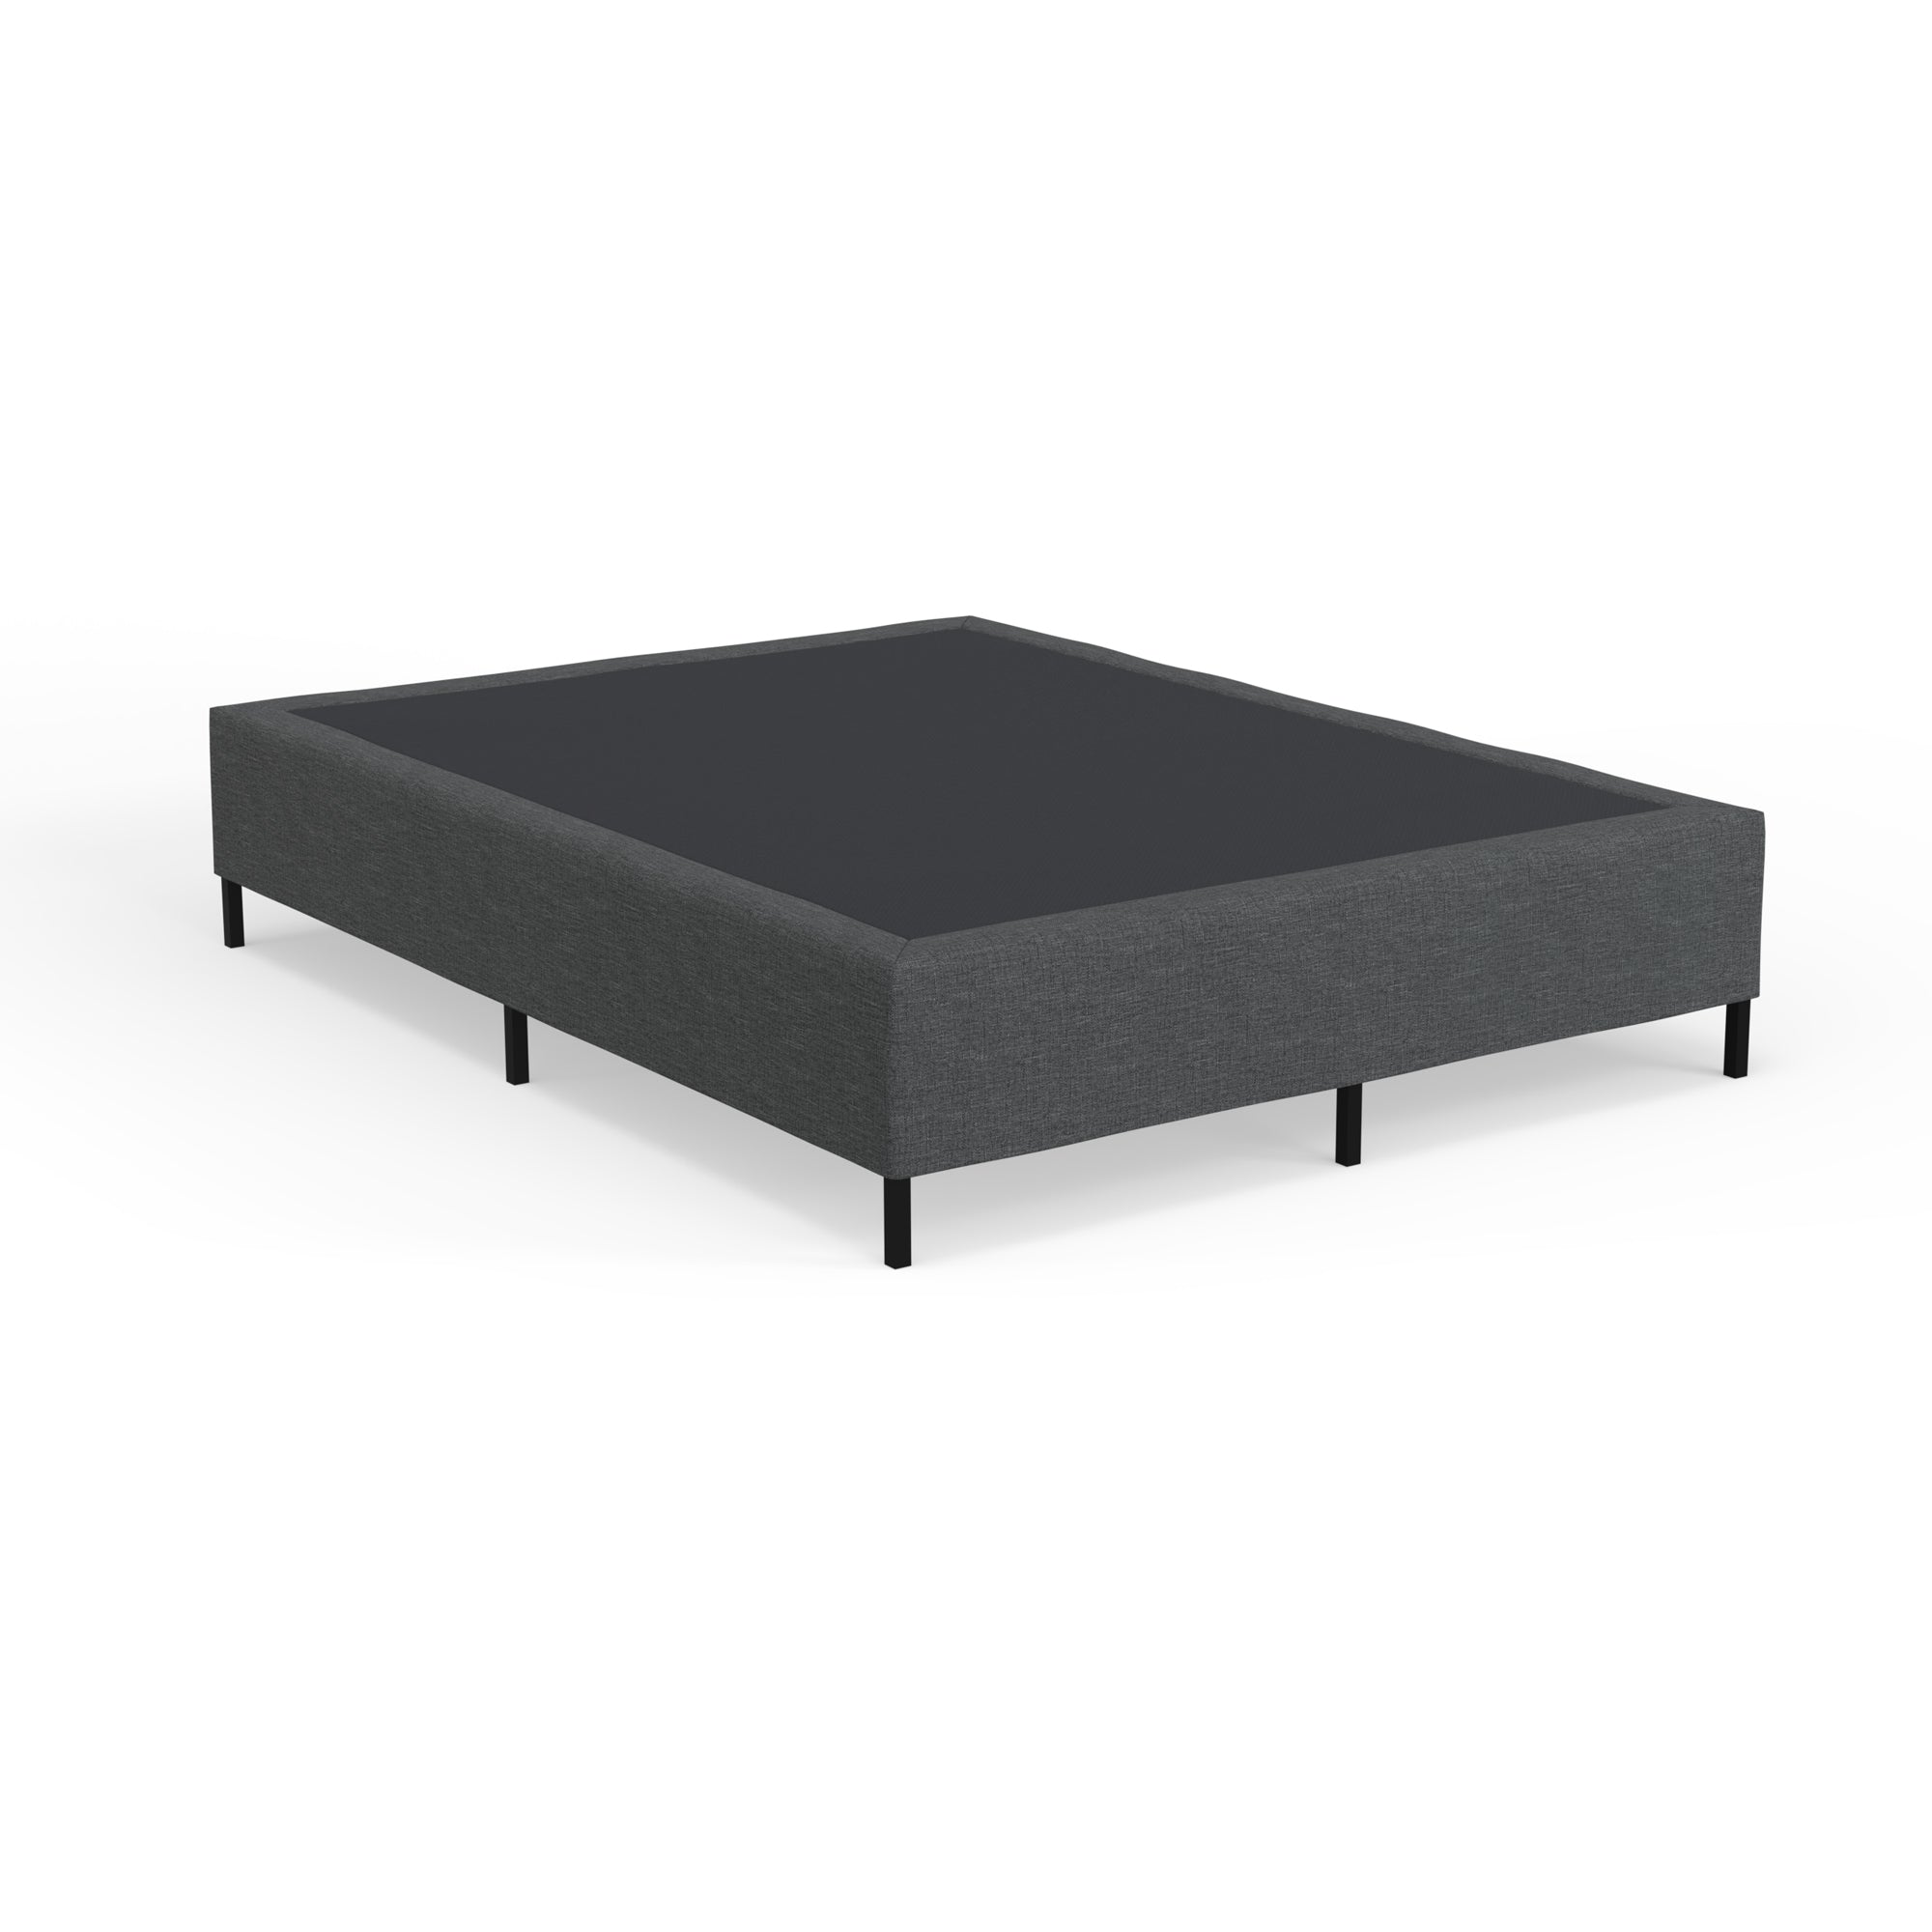 Metal Mattress Foundation with Removable Cover - BlissfulNights.com